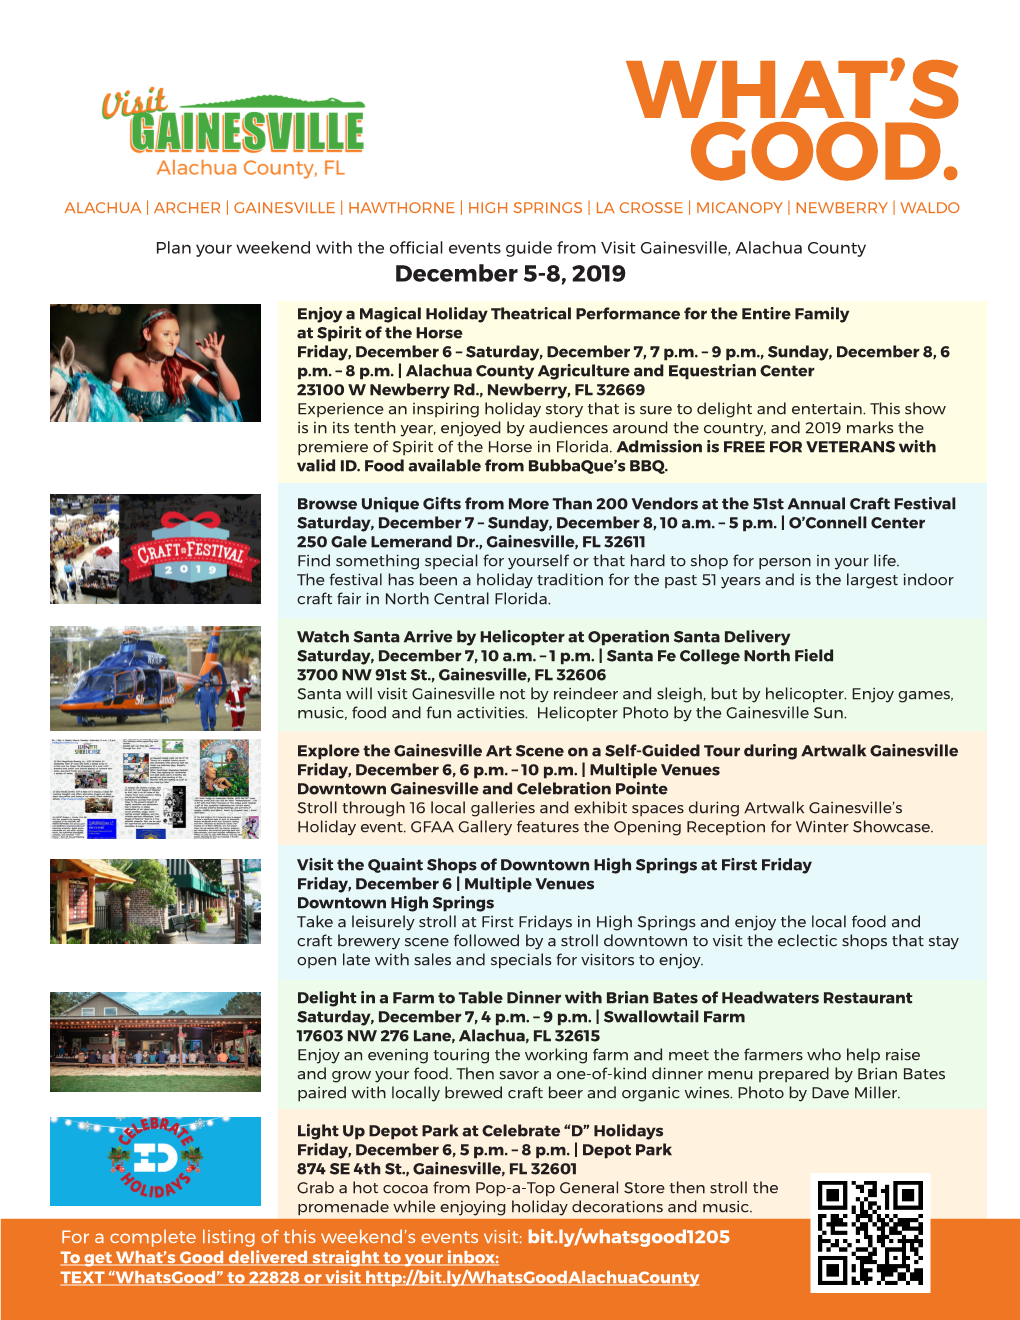 Whats Good Events Guide December 5-8 2019 Gainesville and Alachua